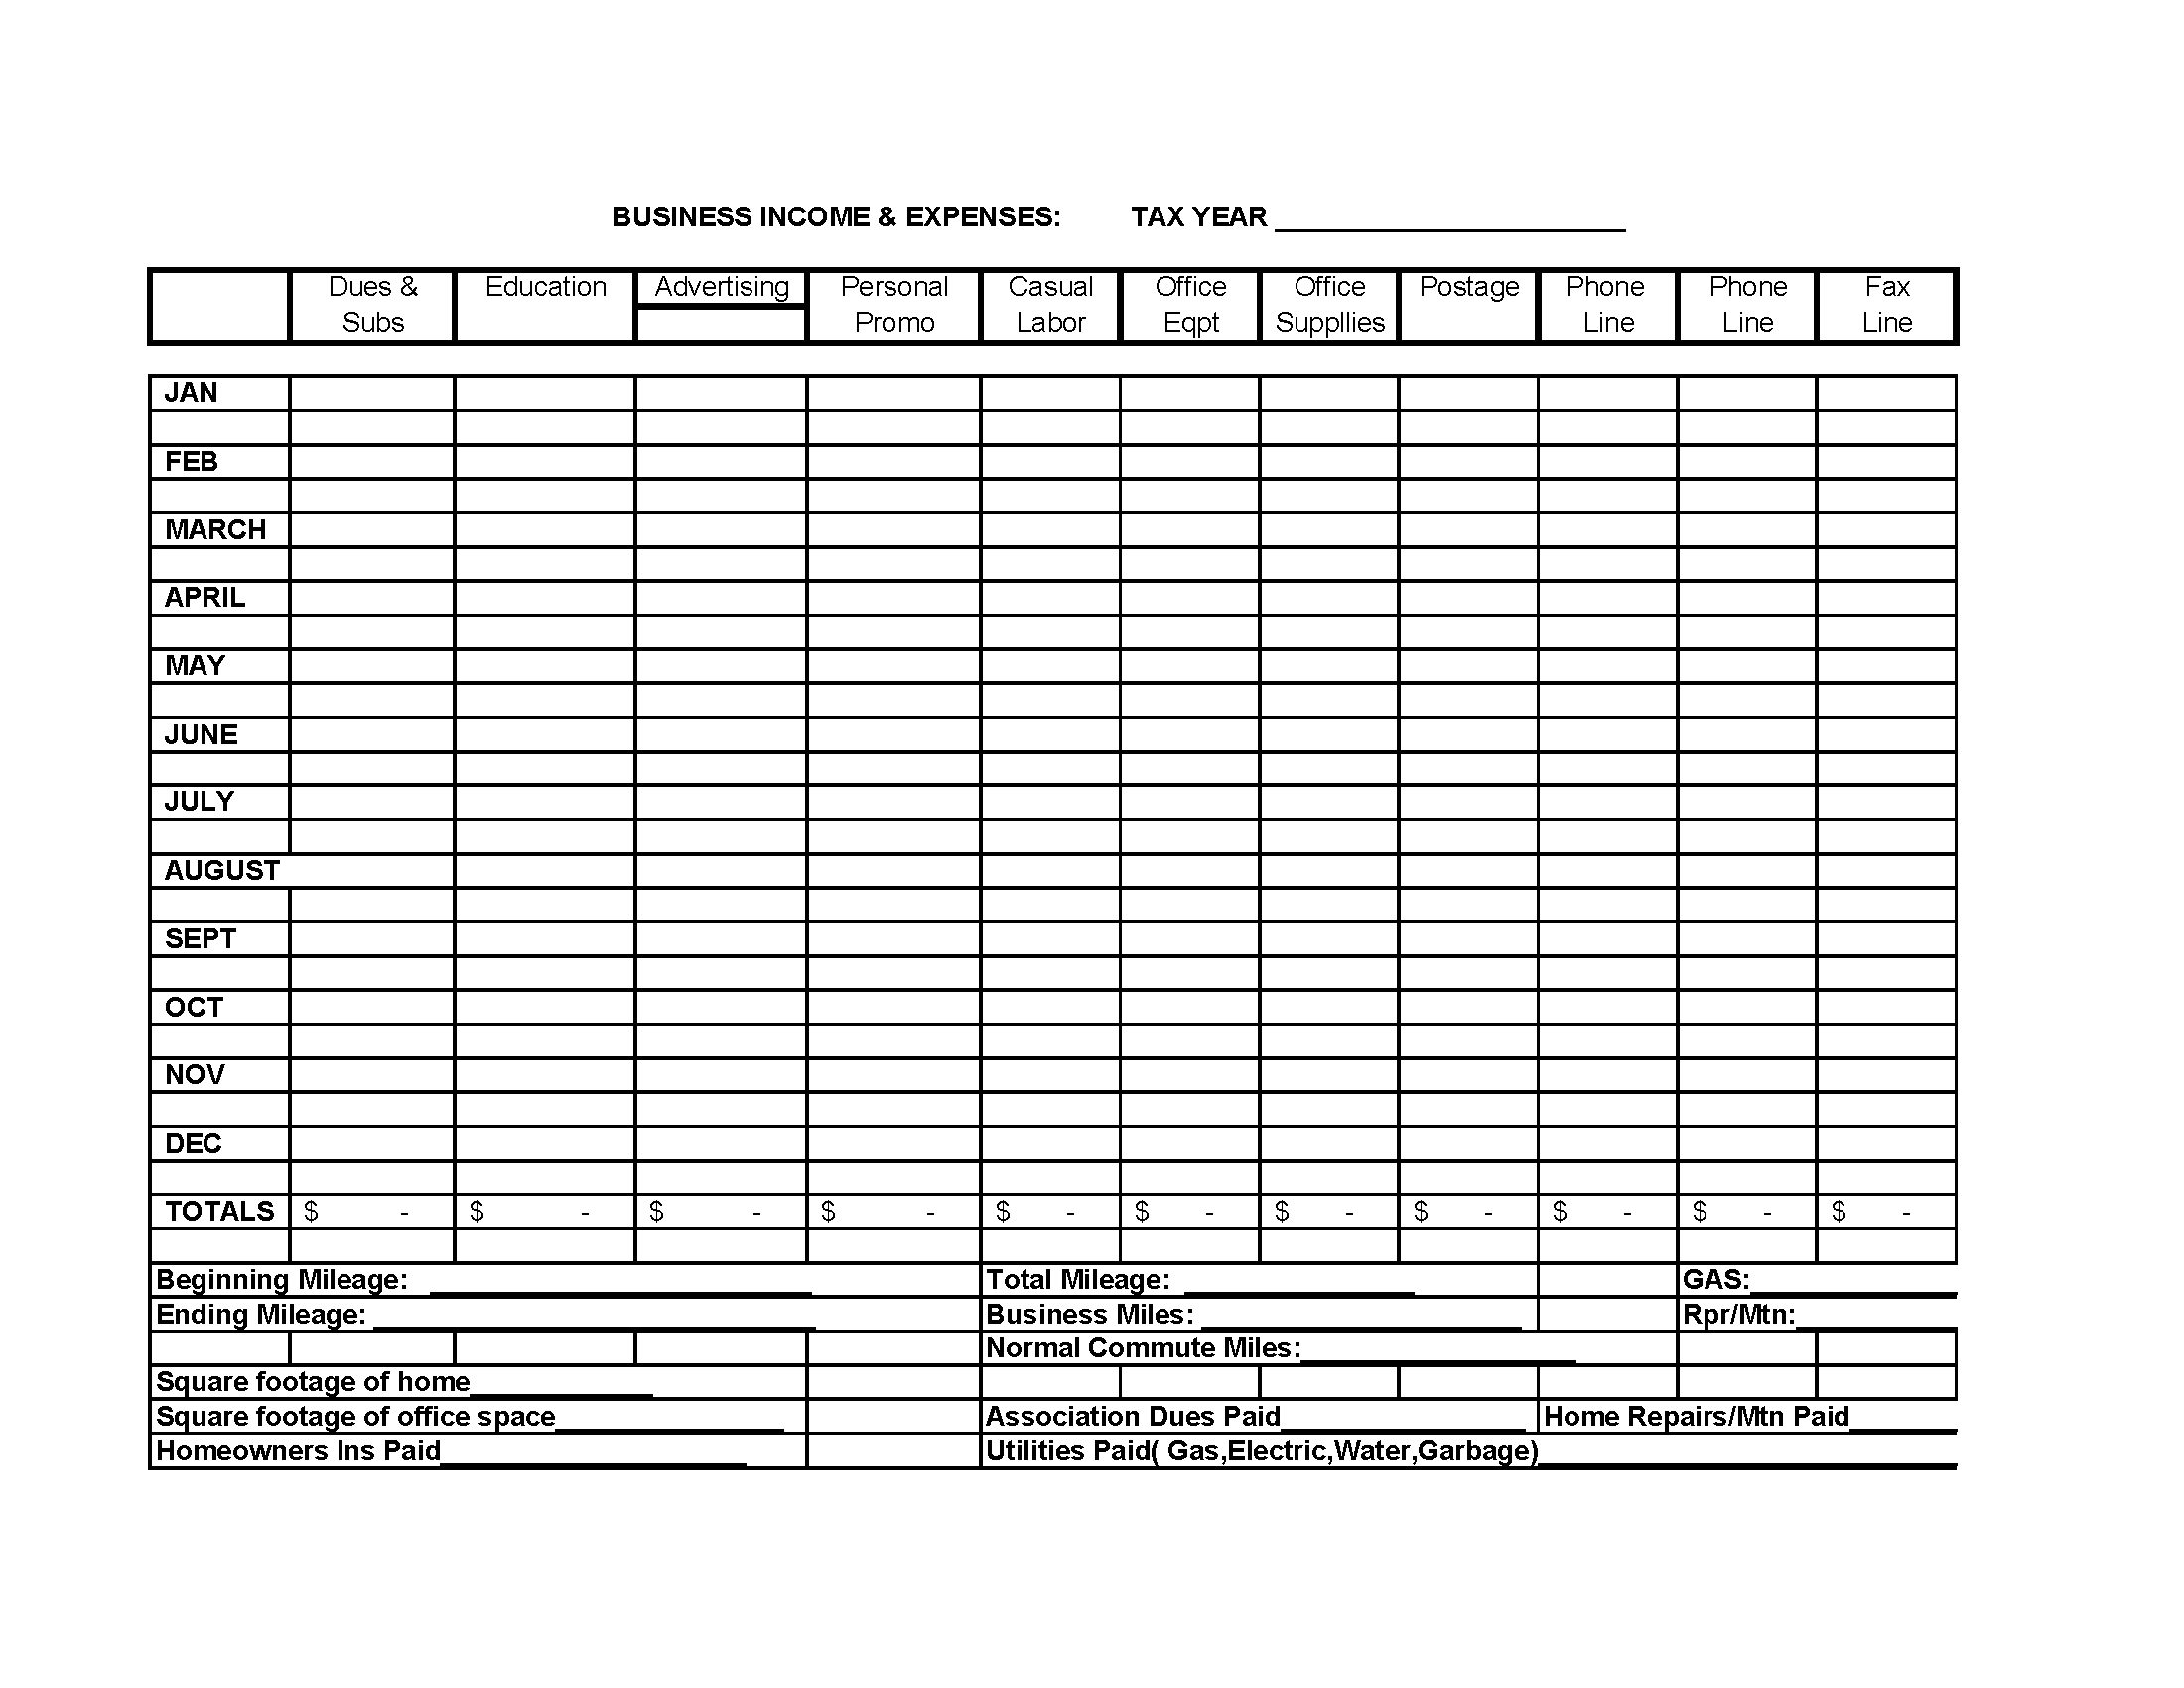 Landlord Spreadsheet Template Free Uk With Landlord Spreadsheet Free  Tagua Spreadsheet Sample Collection